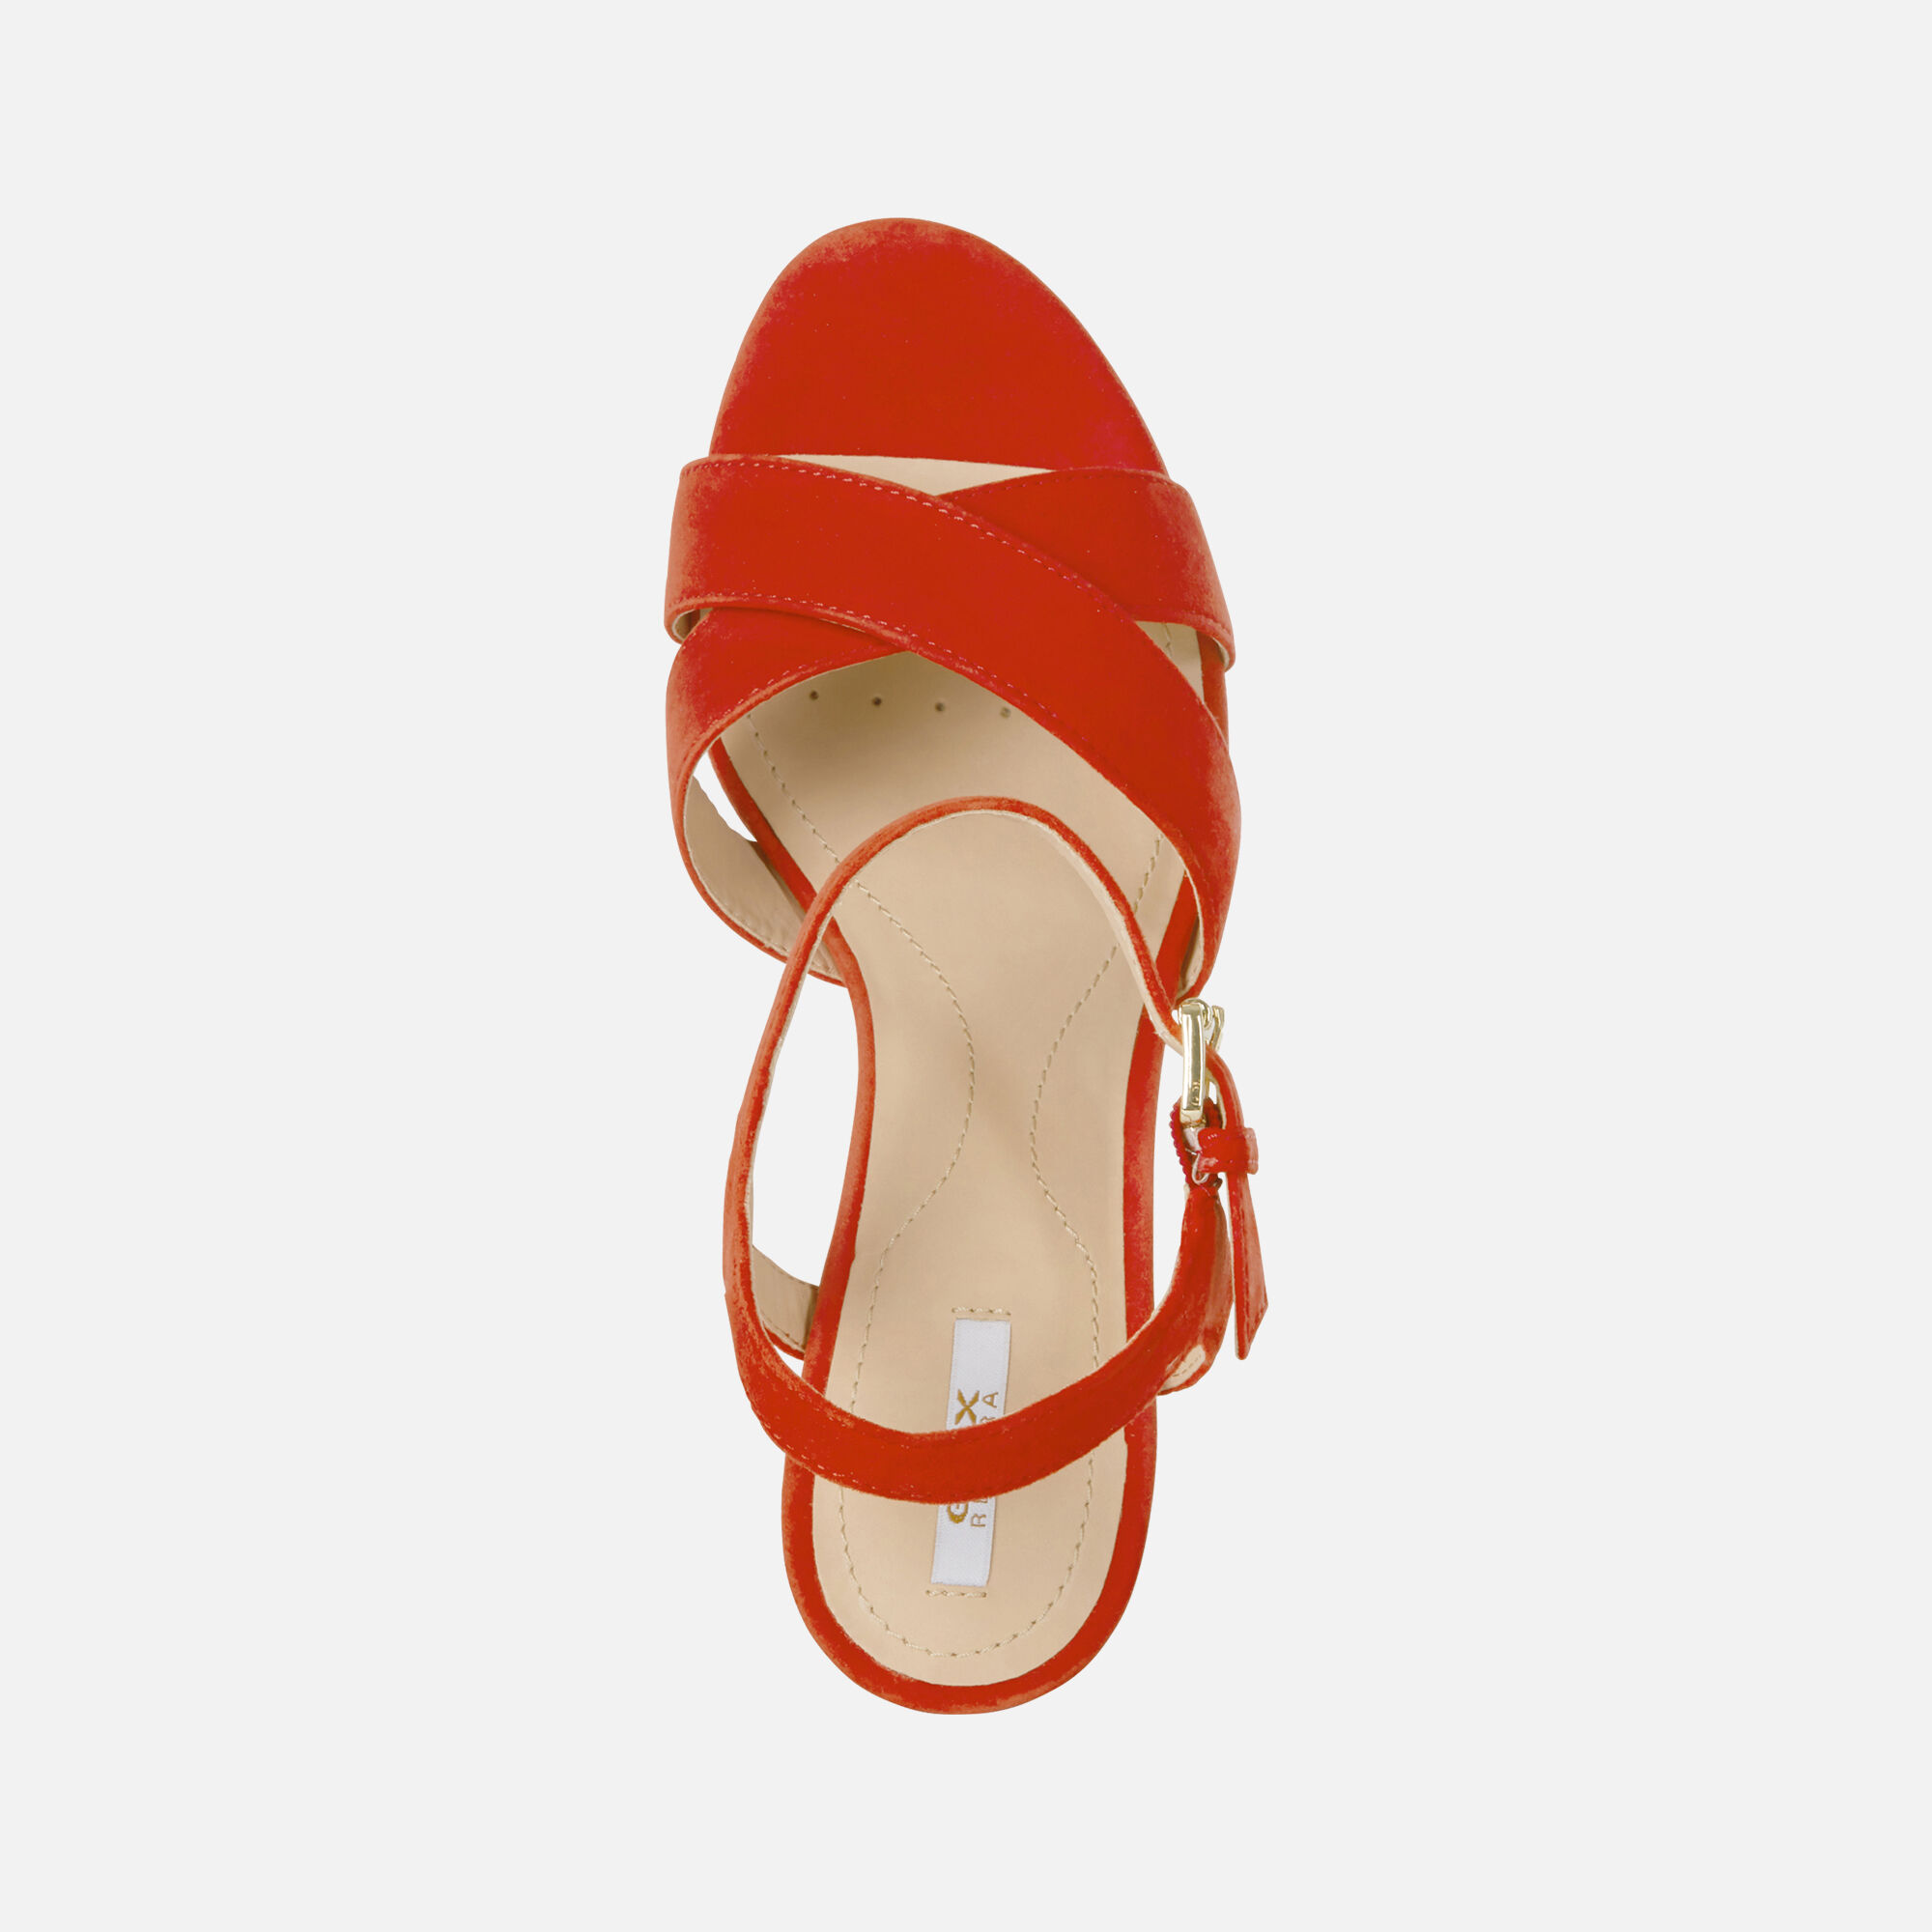 Geox SOLEIL Woman: Scarlet Sandals | Geox ® Official Store